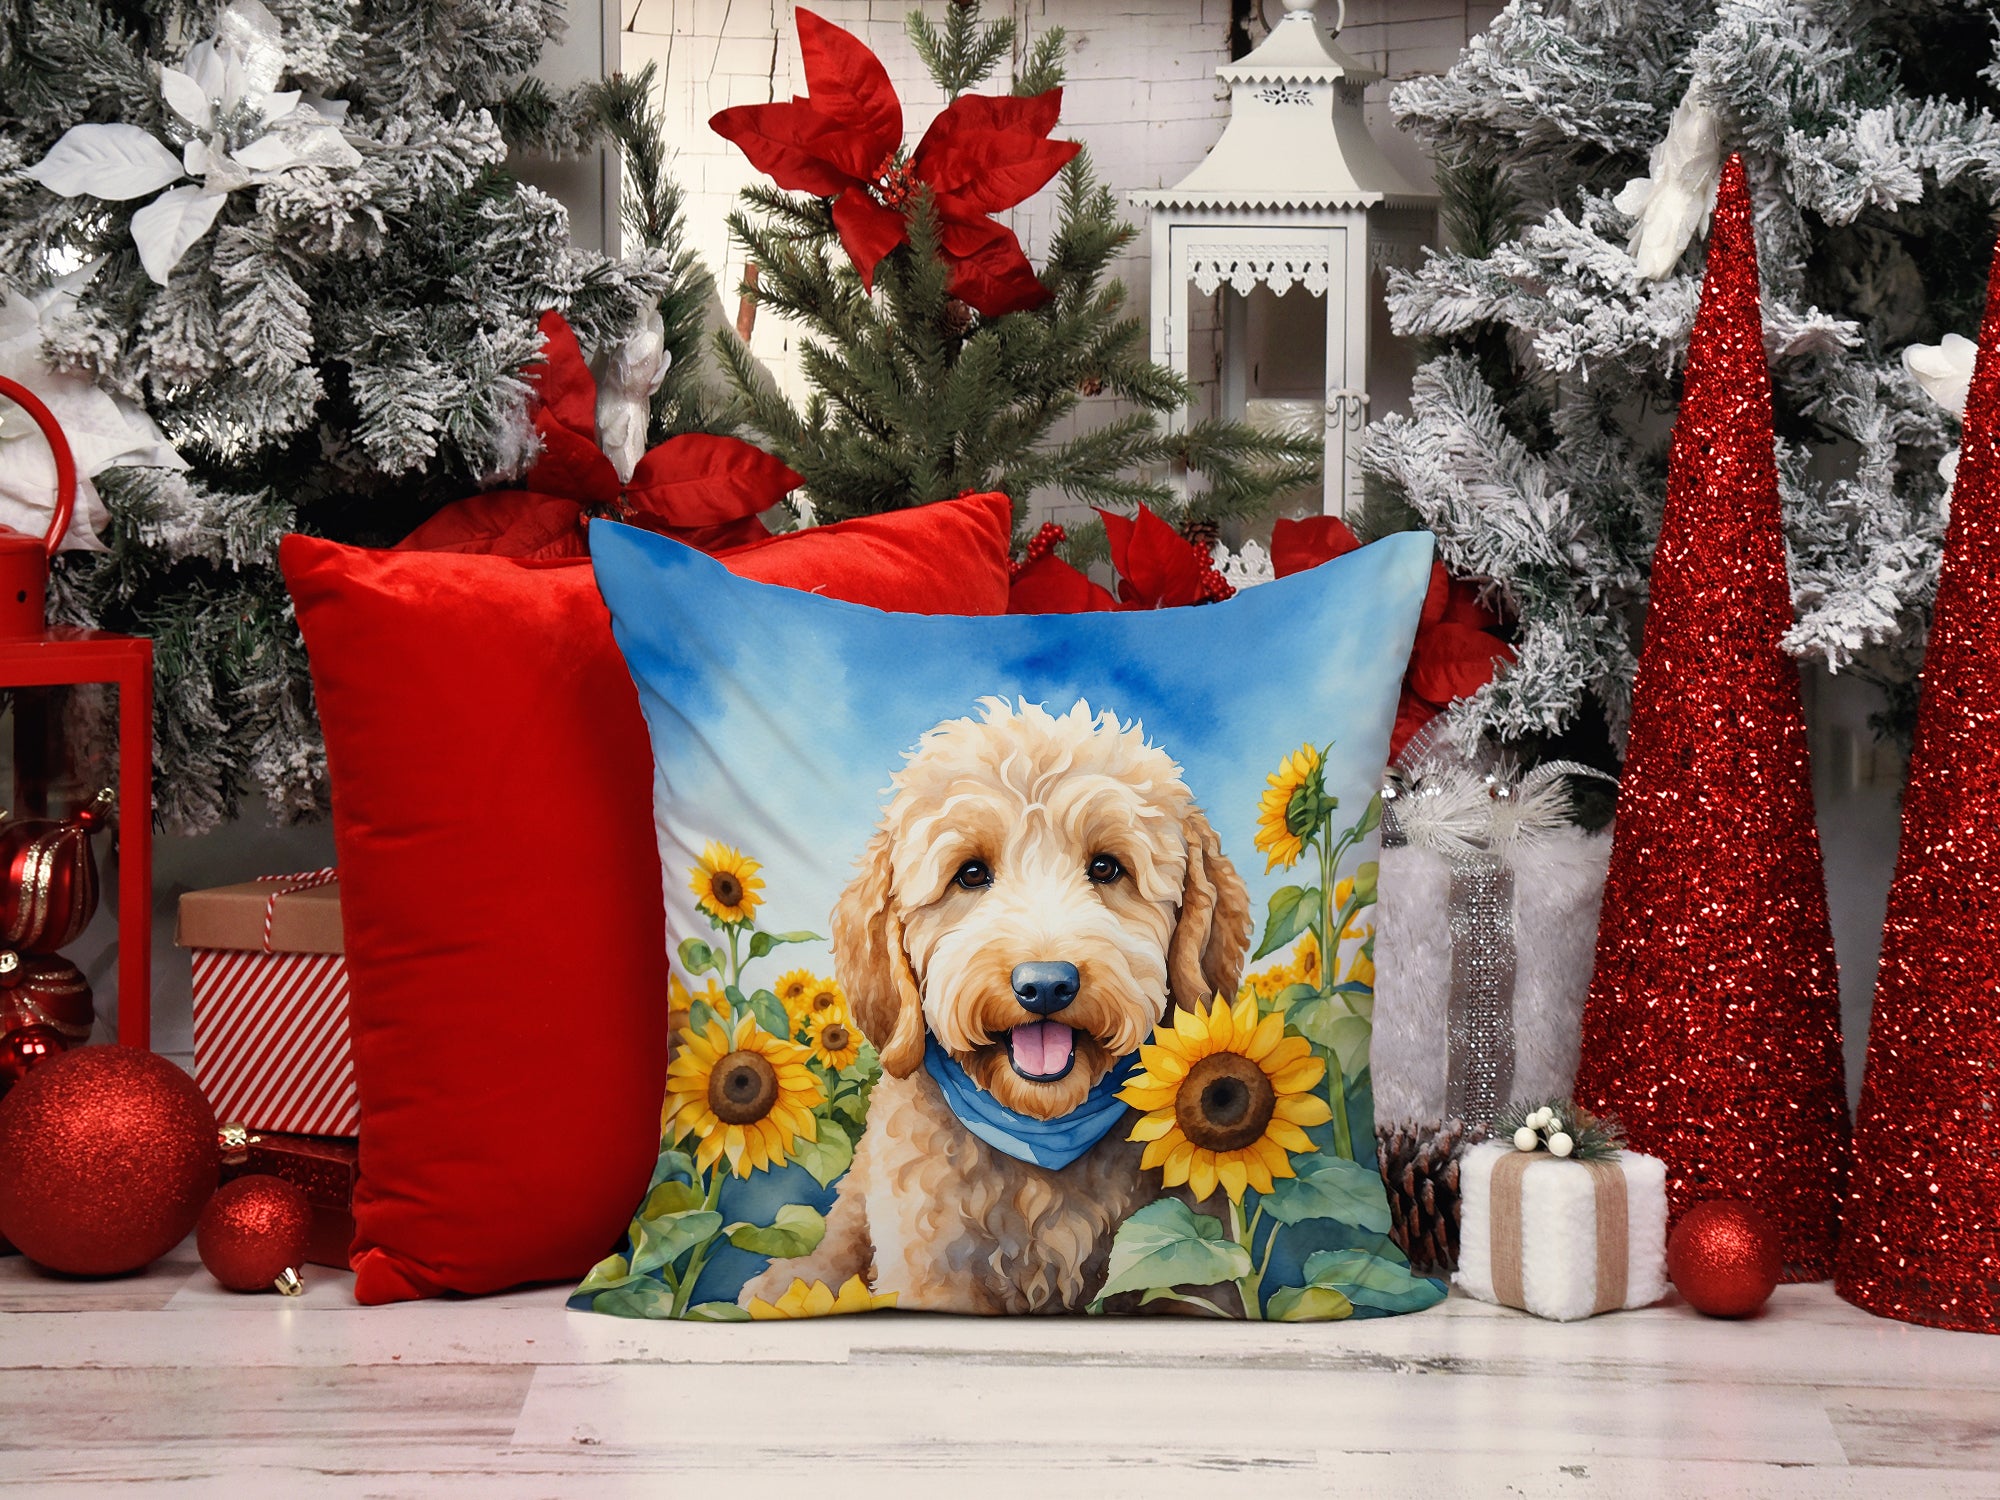 Goldendoodle in Sunflowers Throw Pillow